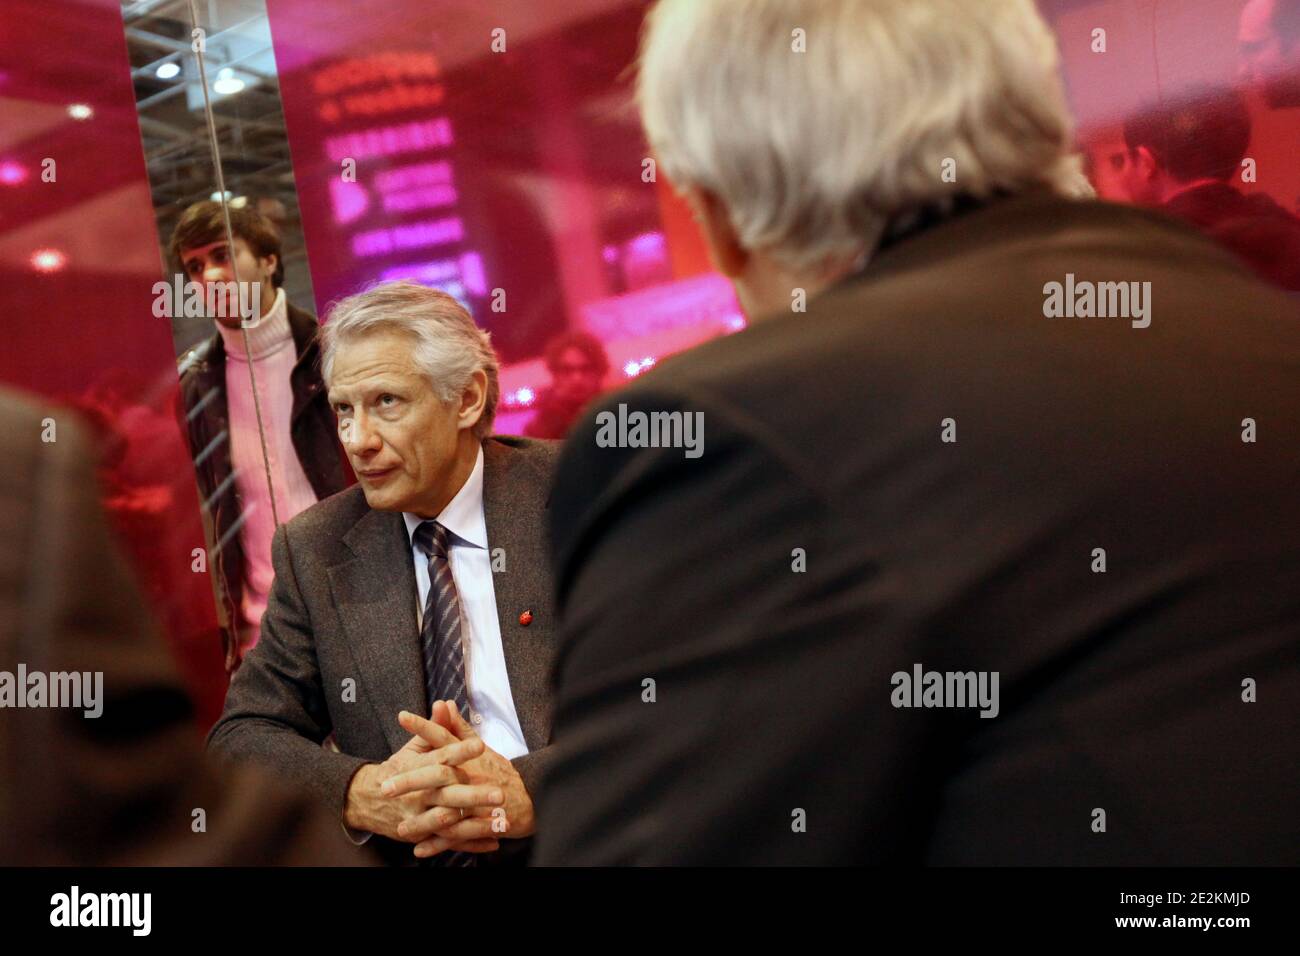 Exclusive-Former French Prime Minister and Foreign Affairs Minister, founder and Chairman of Republique Solidaire RS (United Republic) political movement, Dominique de Villepin participates to a meeting with president of Porcine national federation (FNP), Jean-Michel Serres during his visit at the International Agricultural Fair held at the Porte de Versailles, in Paris, France, on February 23, 2011. Photo by Stephane Lemouton/ABACAPRESS.COM Stock Photo